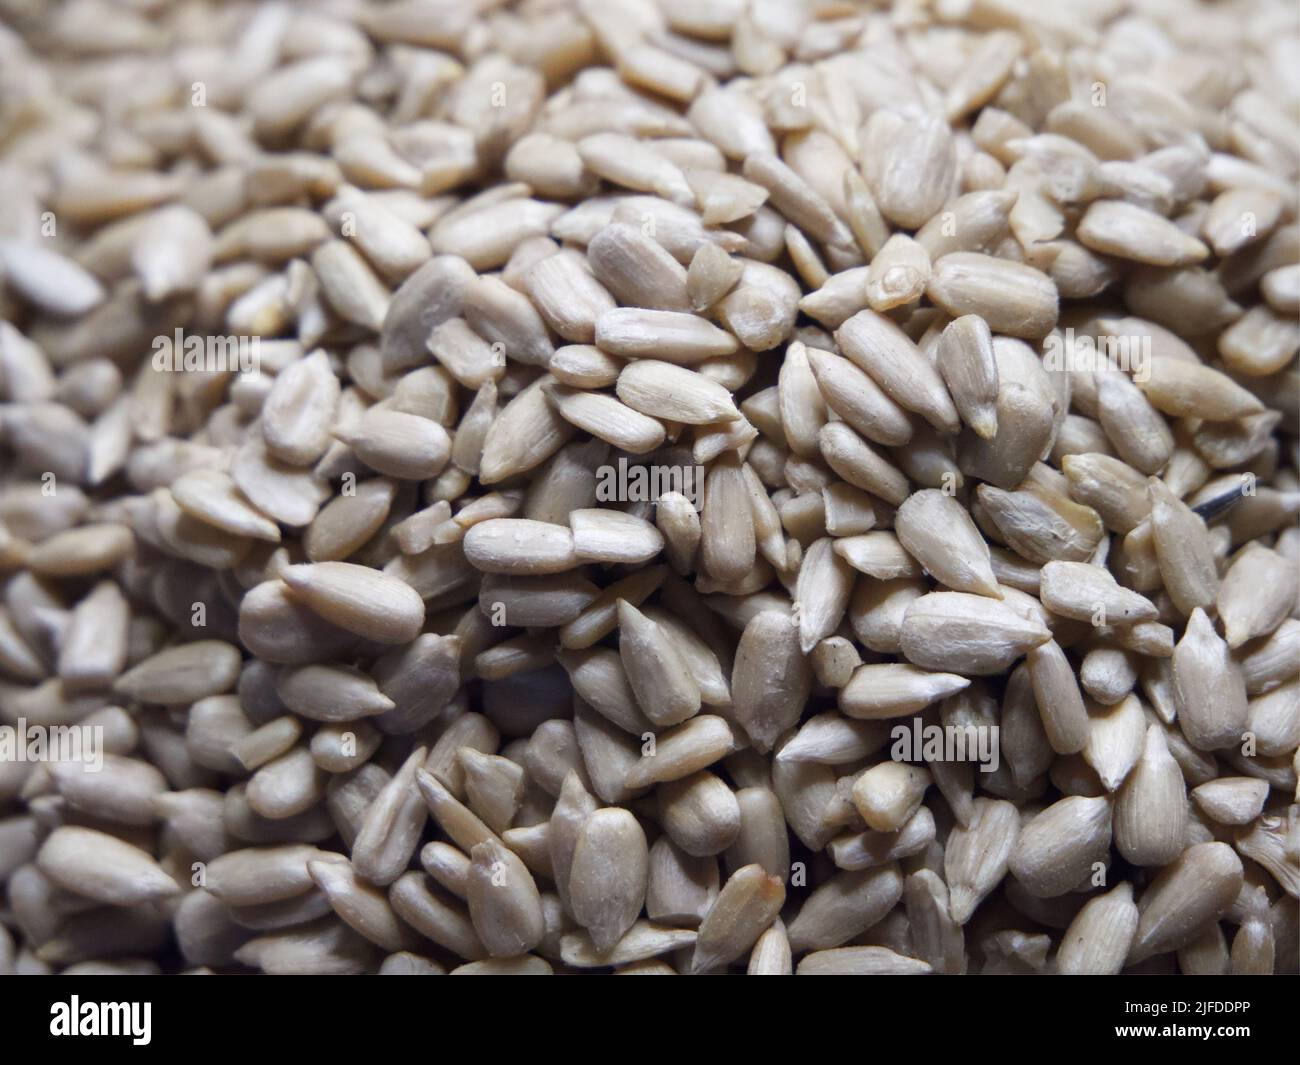 Lots of peeled sunflower seeds close-up. Heap of seeds Stock Photo